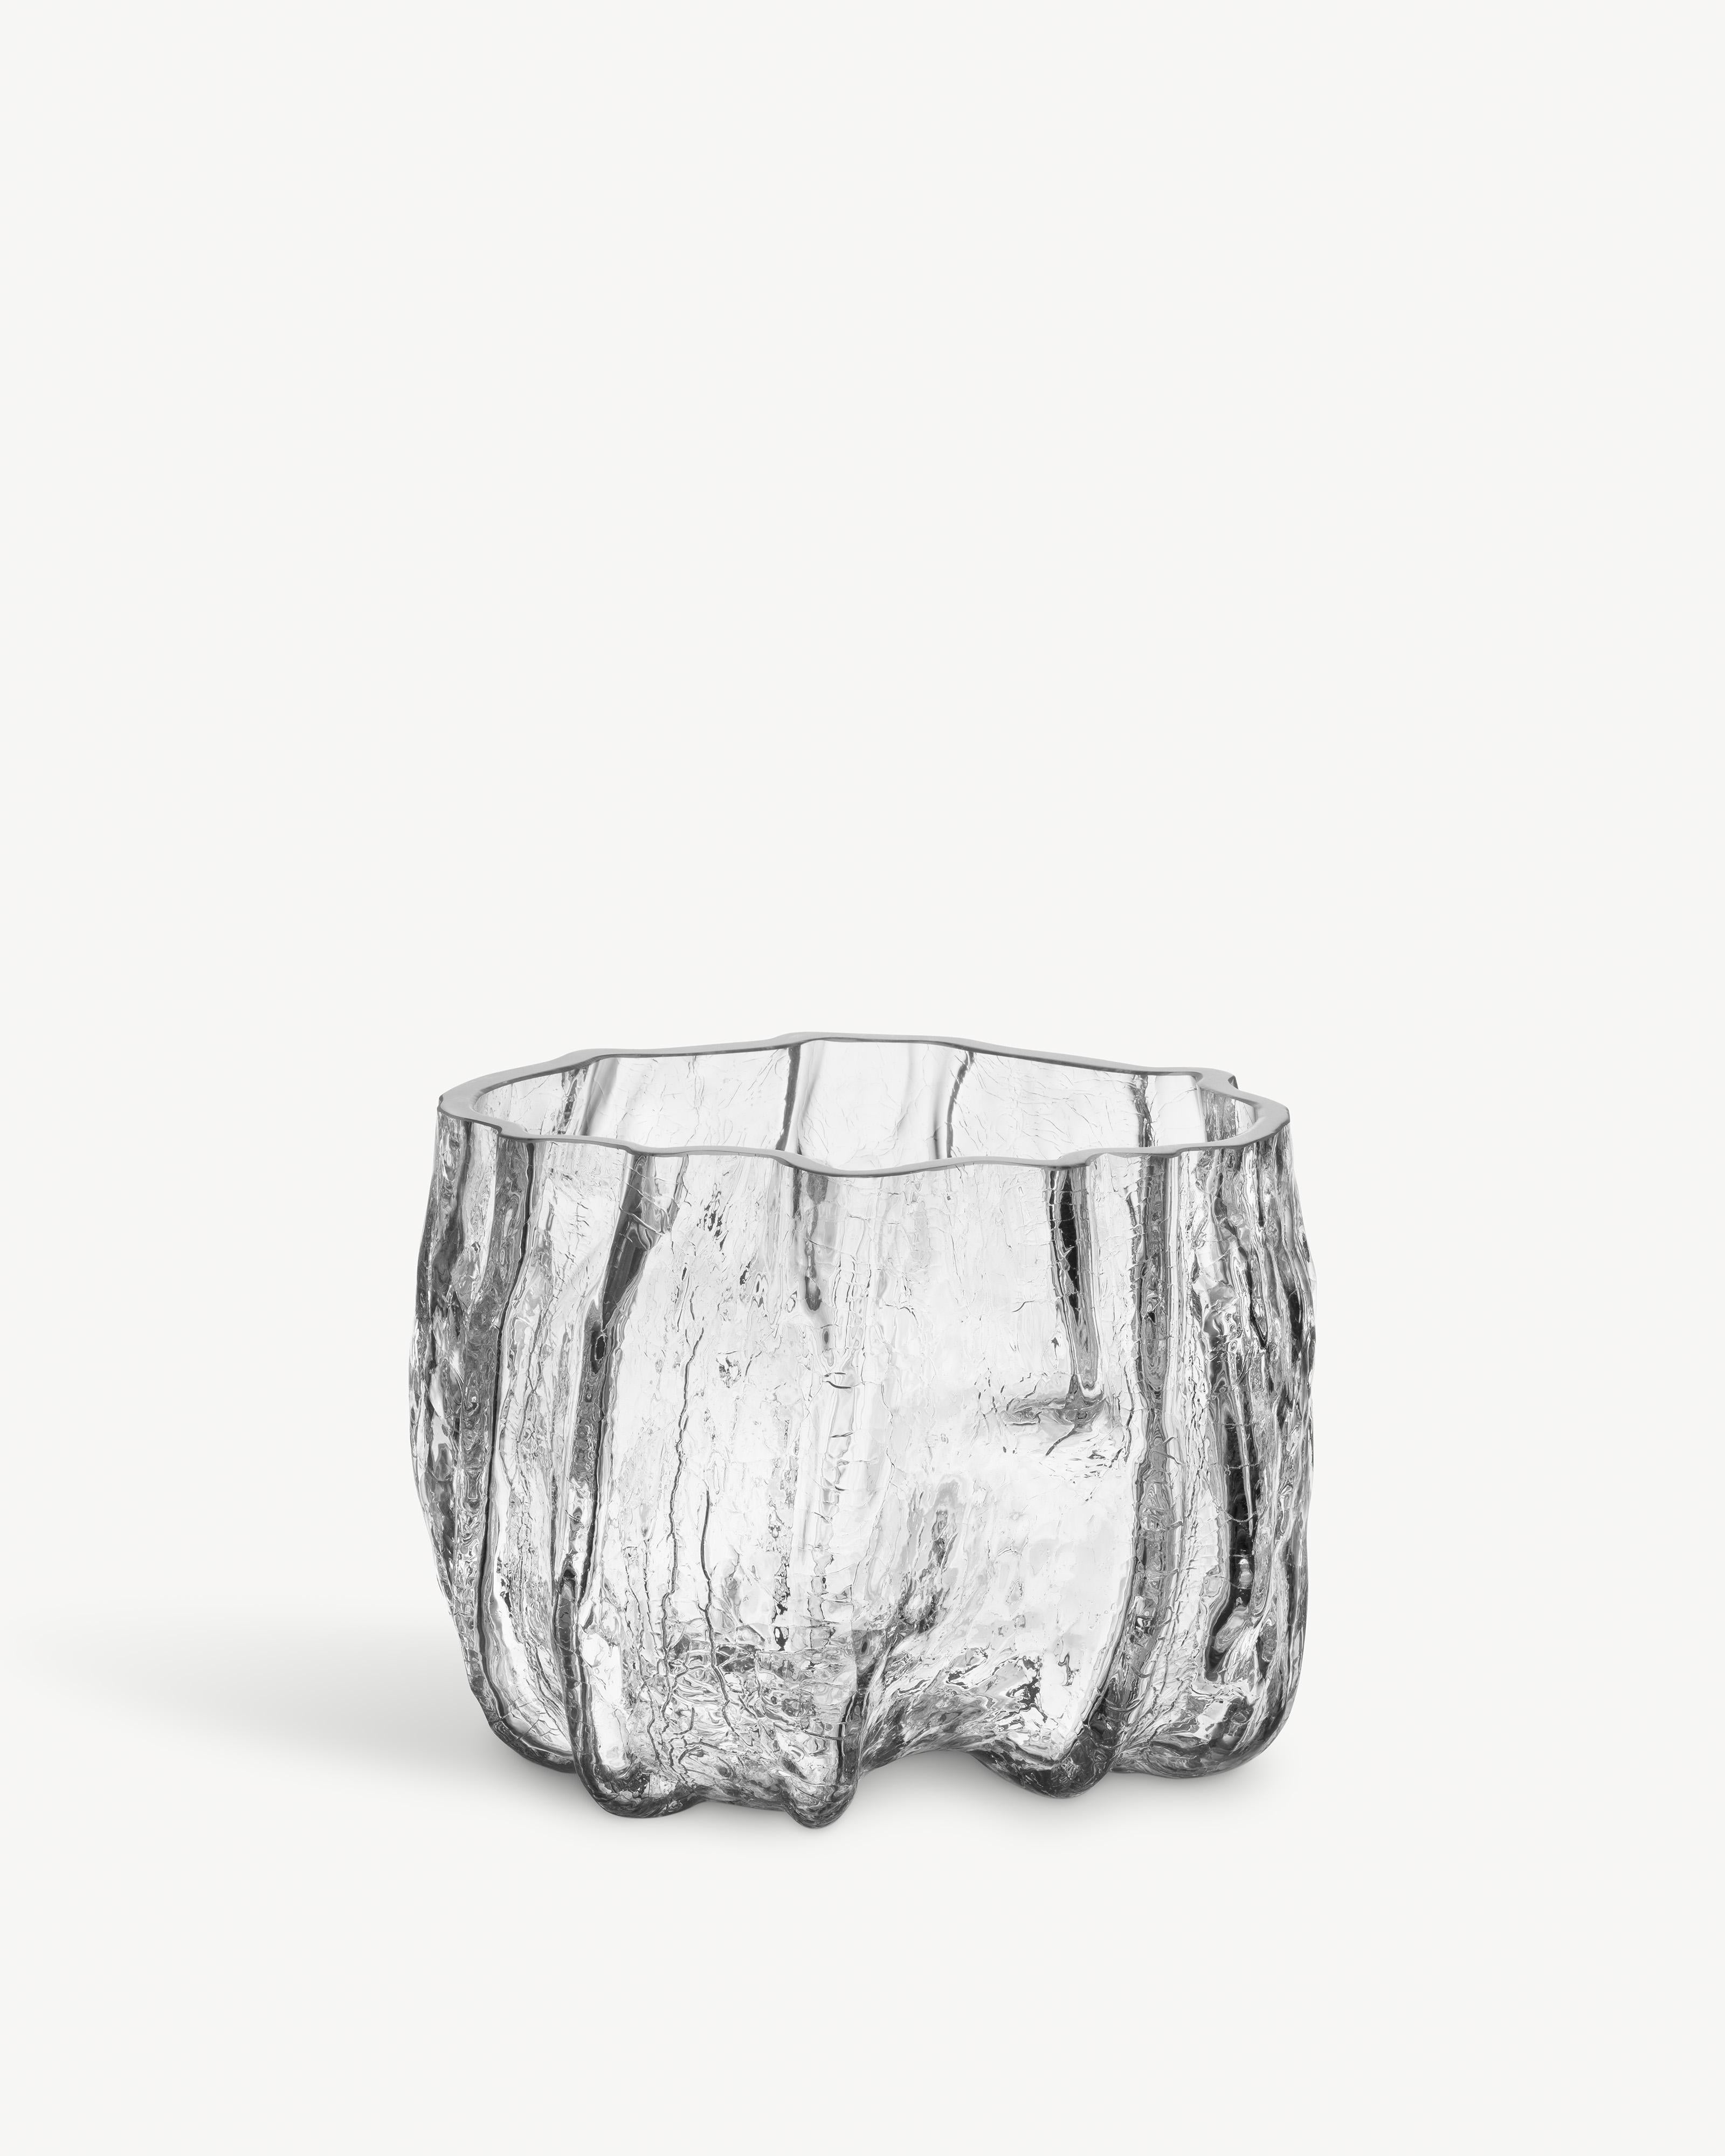 Crackle and thunder – a magical wonder! At Kosta Boda, we marvel at beautifully preserved cracks in glass. The clear glass vase from the Crackle collection has an expressive, sculptural exterior created using an old handicraft technique where the